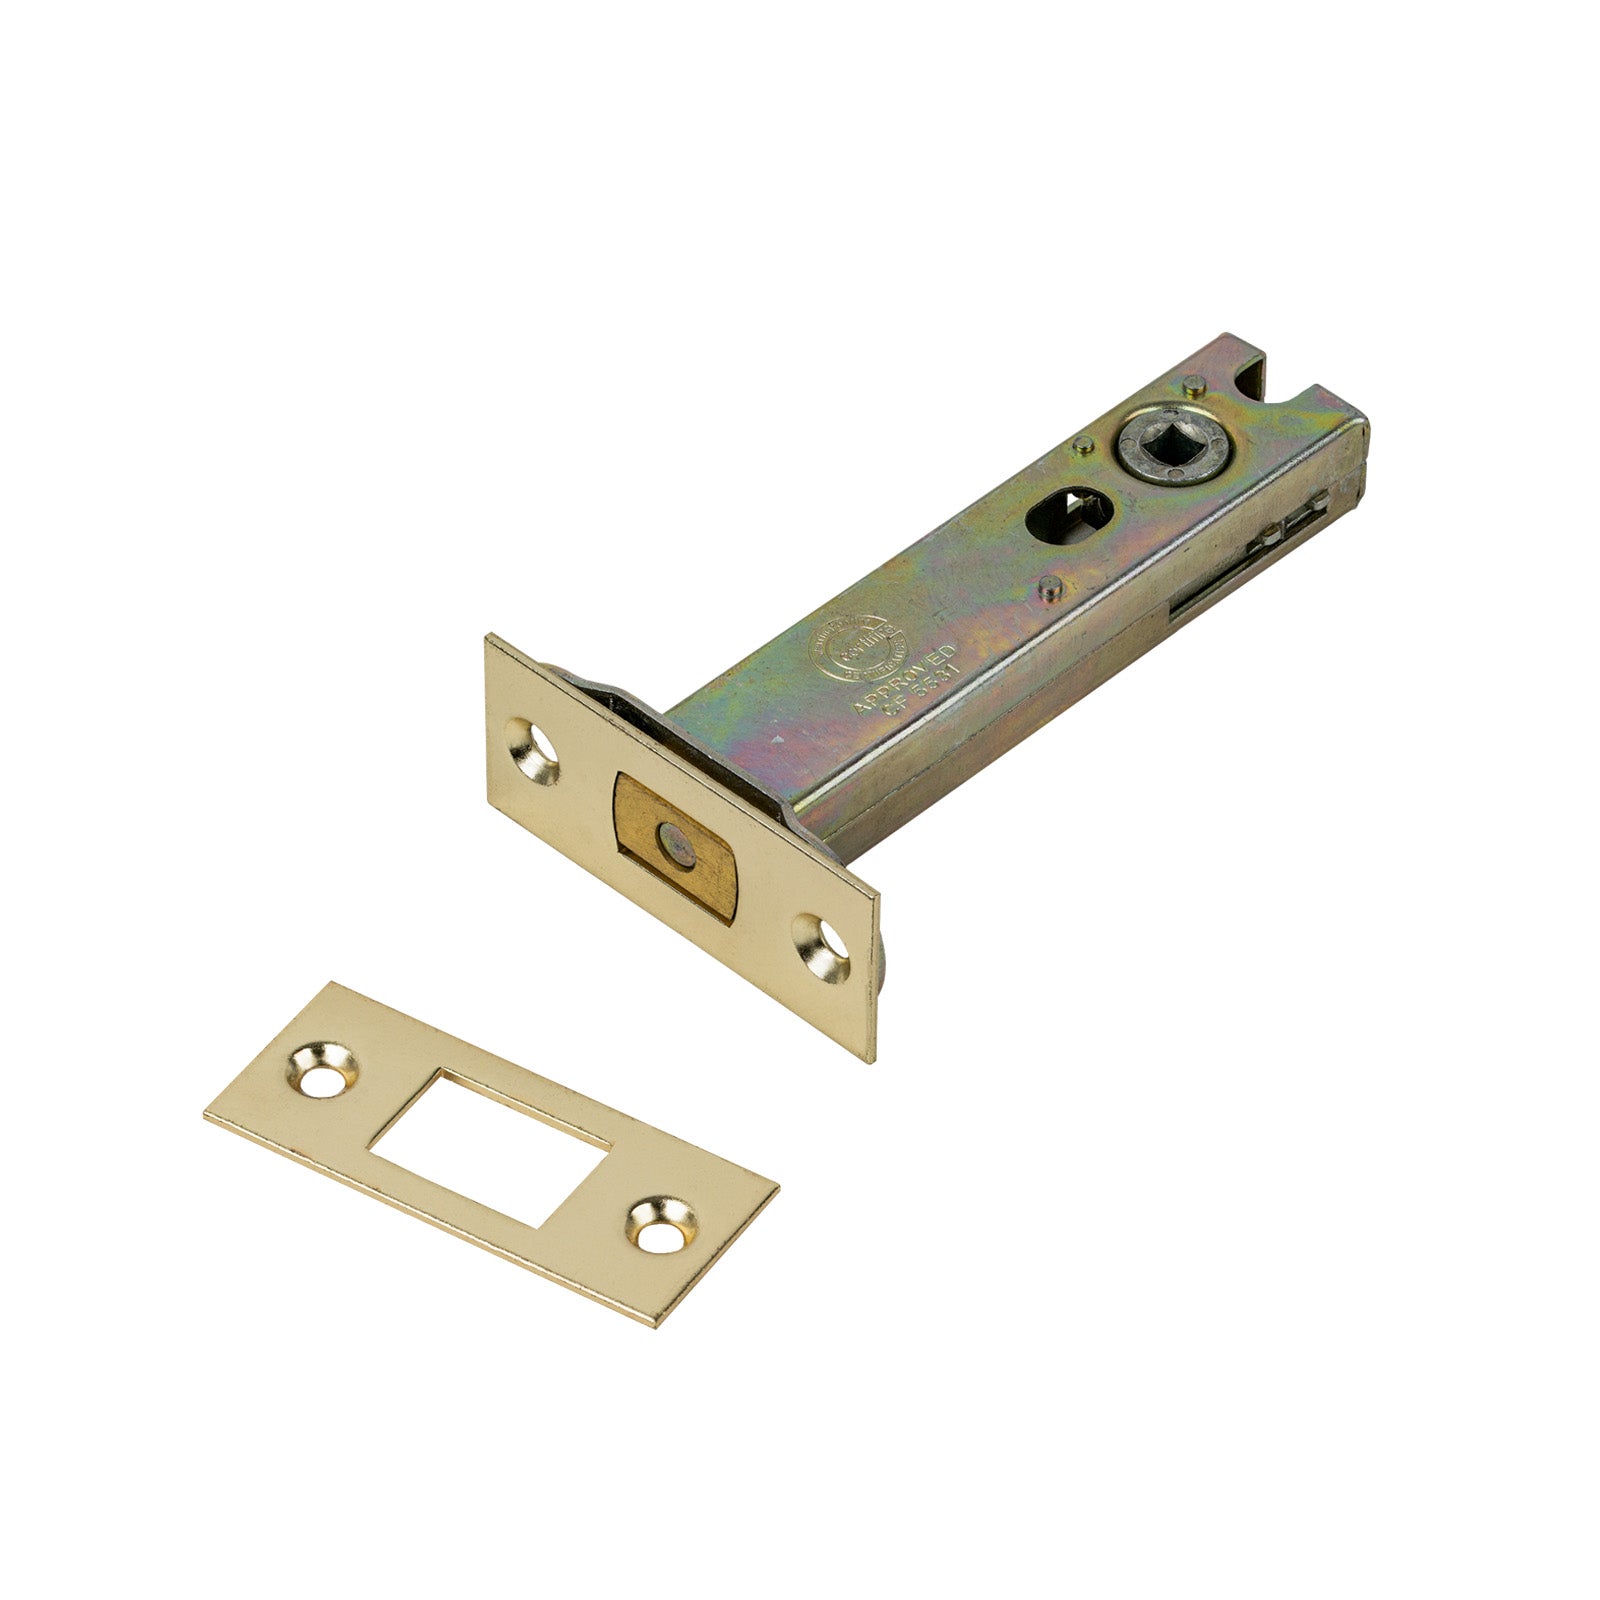 SHOW Bathroom Deadbolt - 4 Inch with Polished brass finished forend and striker plate